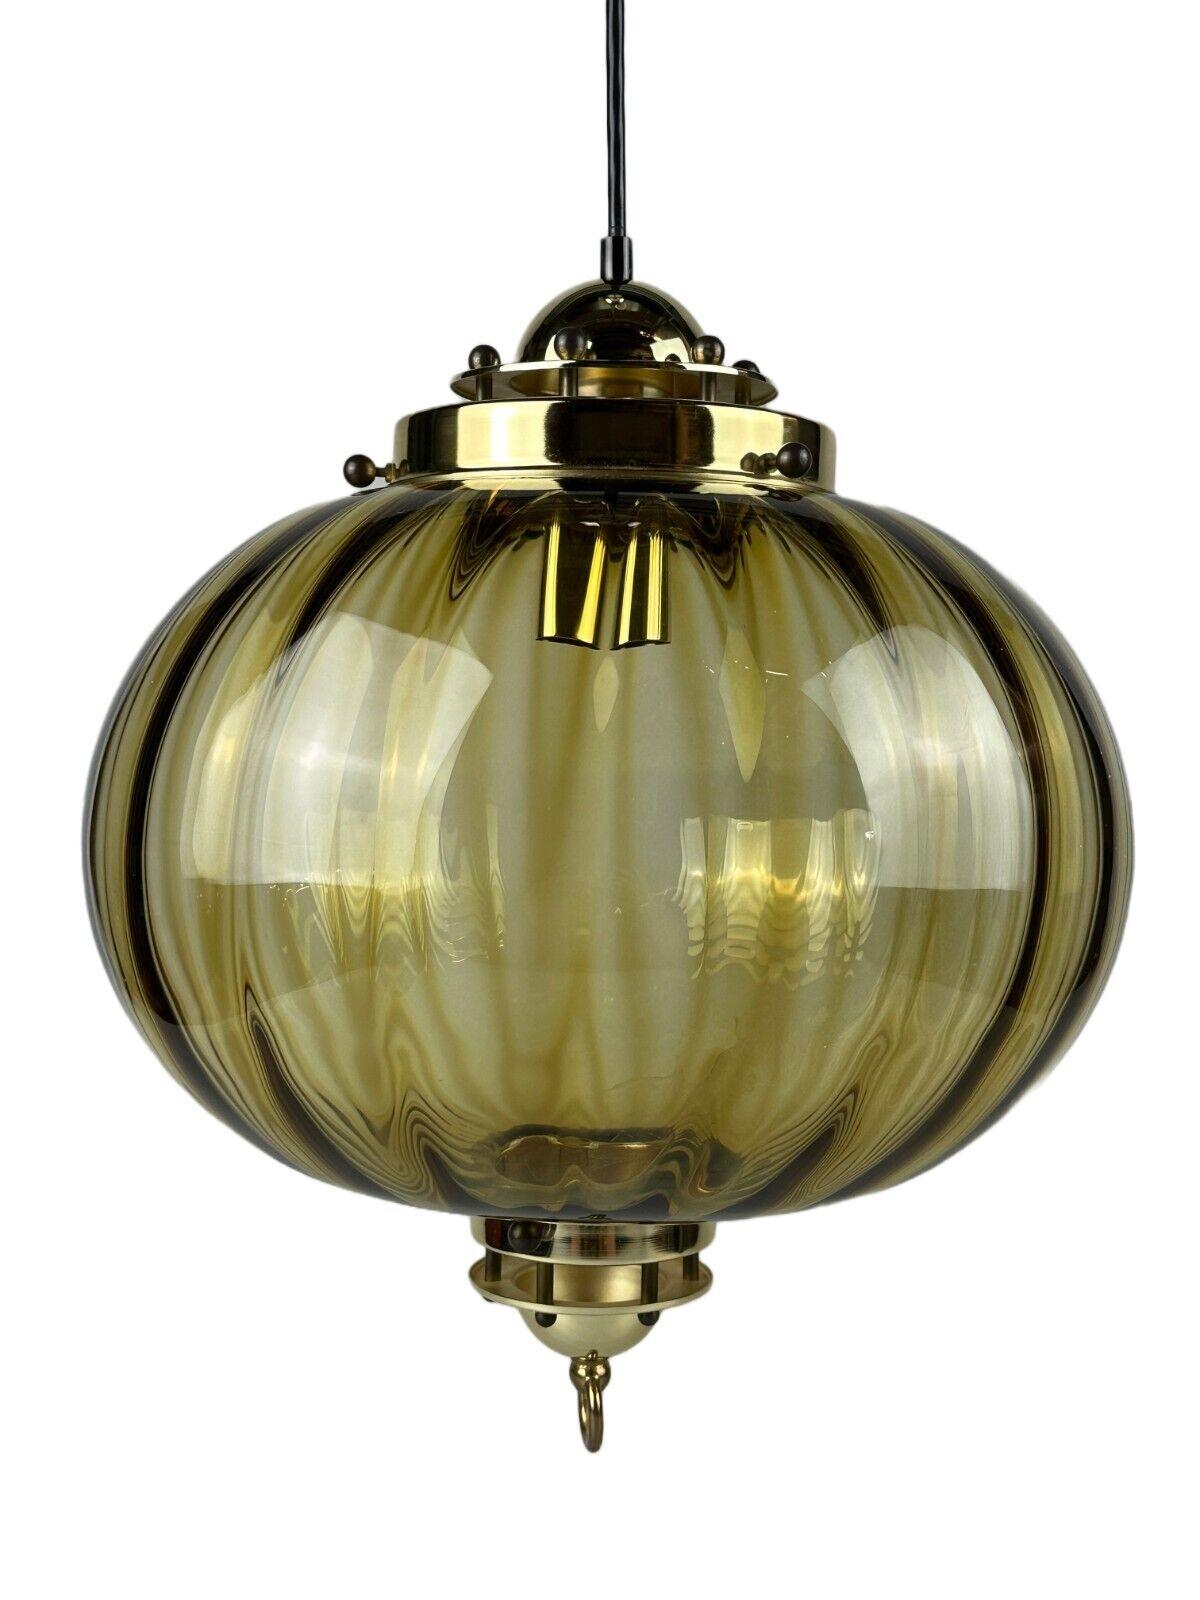 60s 70s Peill & Putzler hanging lamp ceiling lamp glass space age design

Object: ceiling lamp

Manufacturer: Peill & Putzler

Condition: good

Age: around 1960-1970

Dimensions:

Diameter = 38cm
Height = 40cm

Other notes:

E27 socket

The pictures